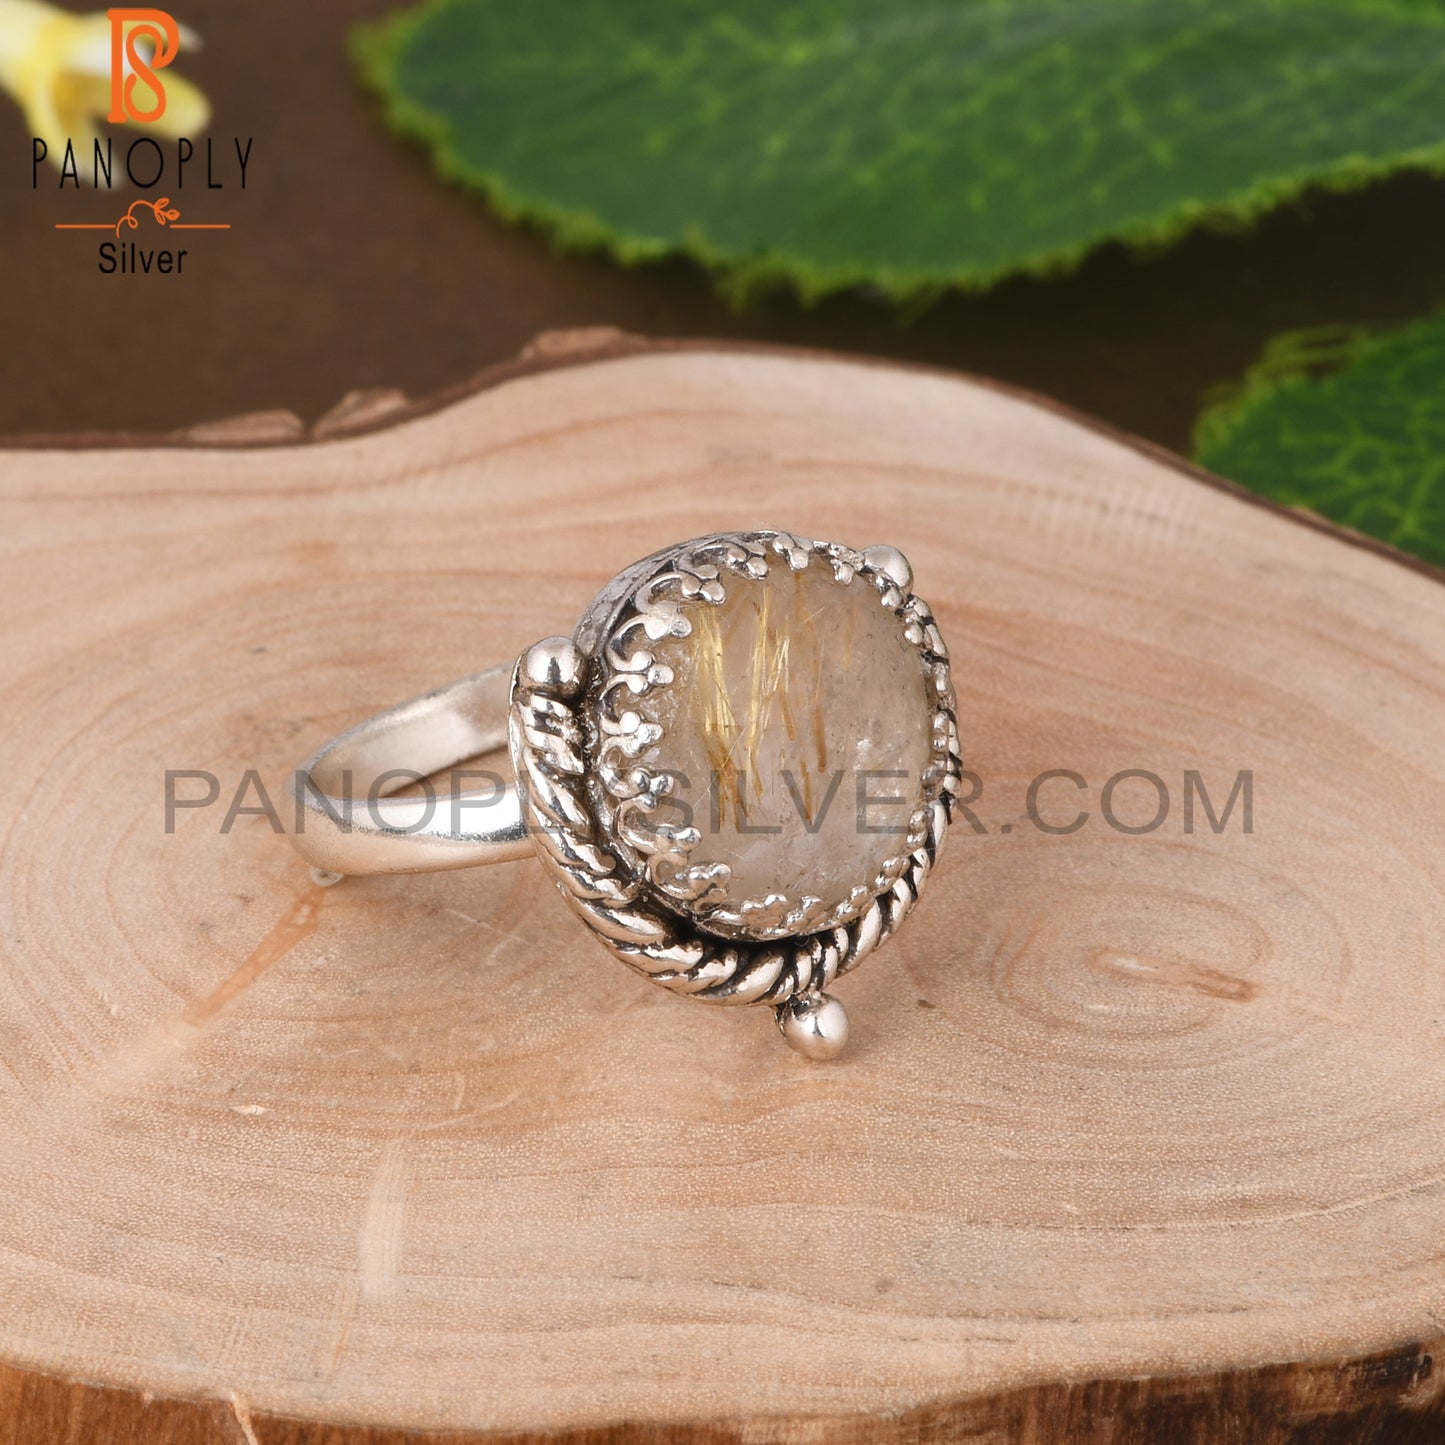 Golden Rutile Round 925 Sterling Silver Ring